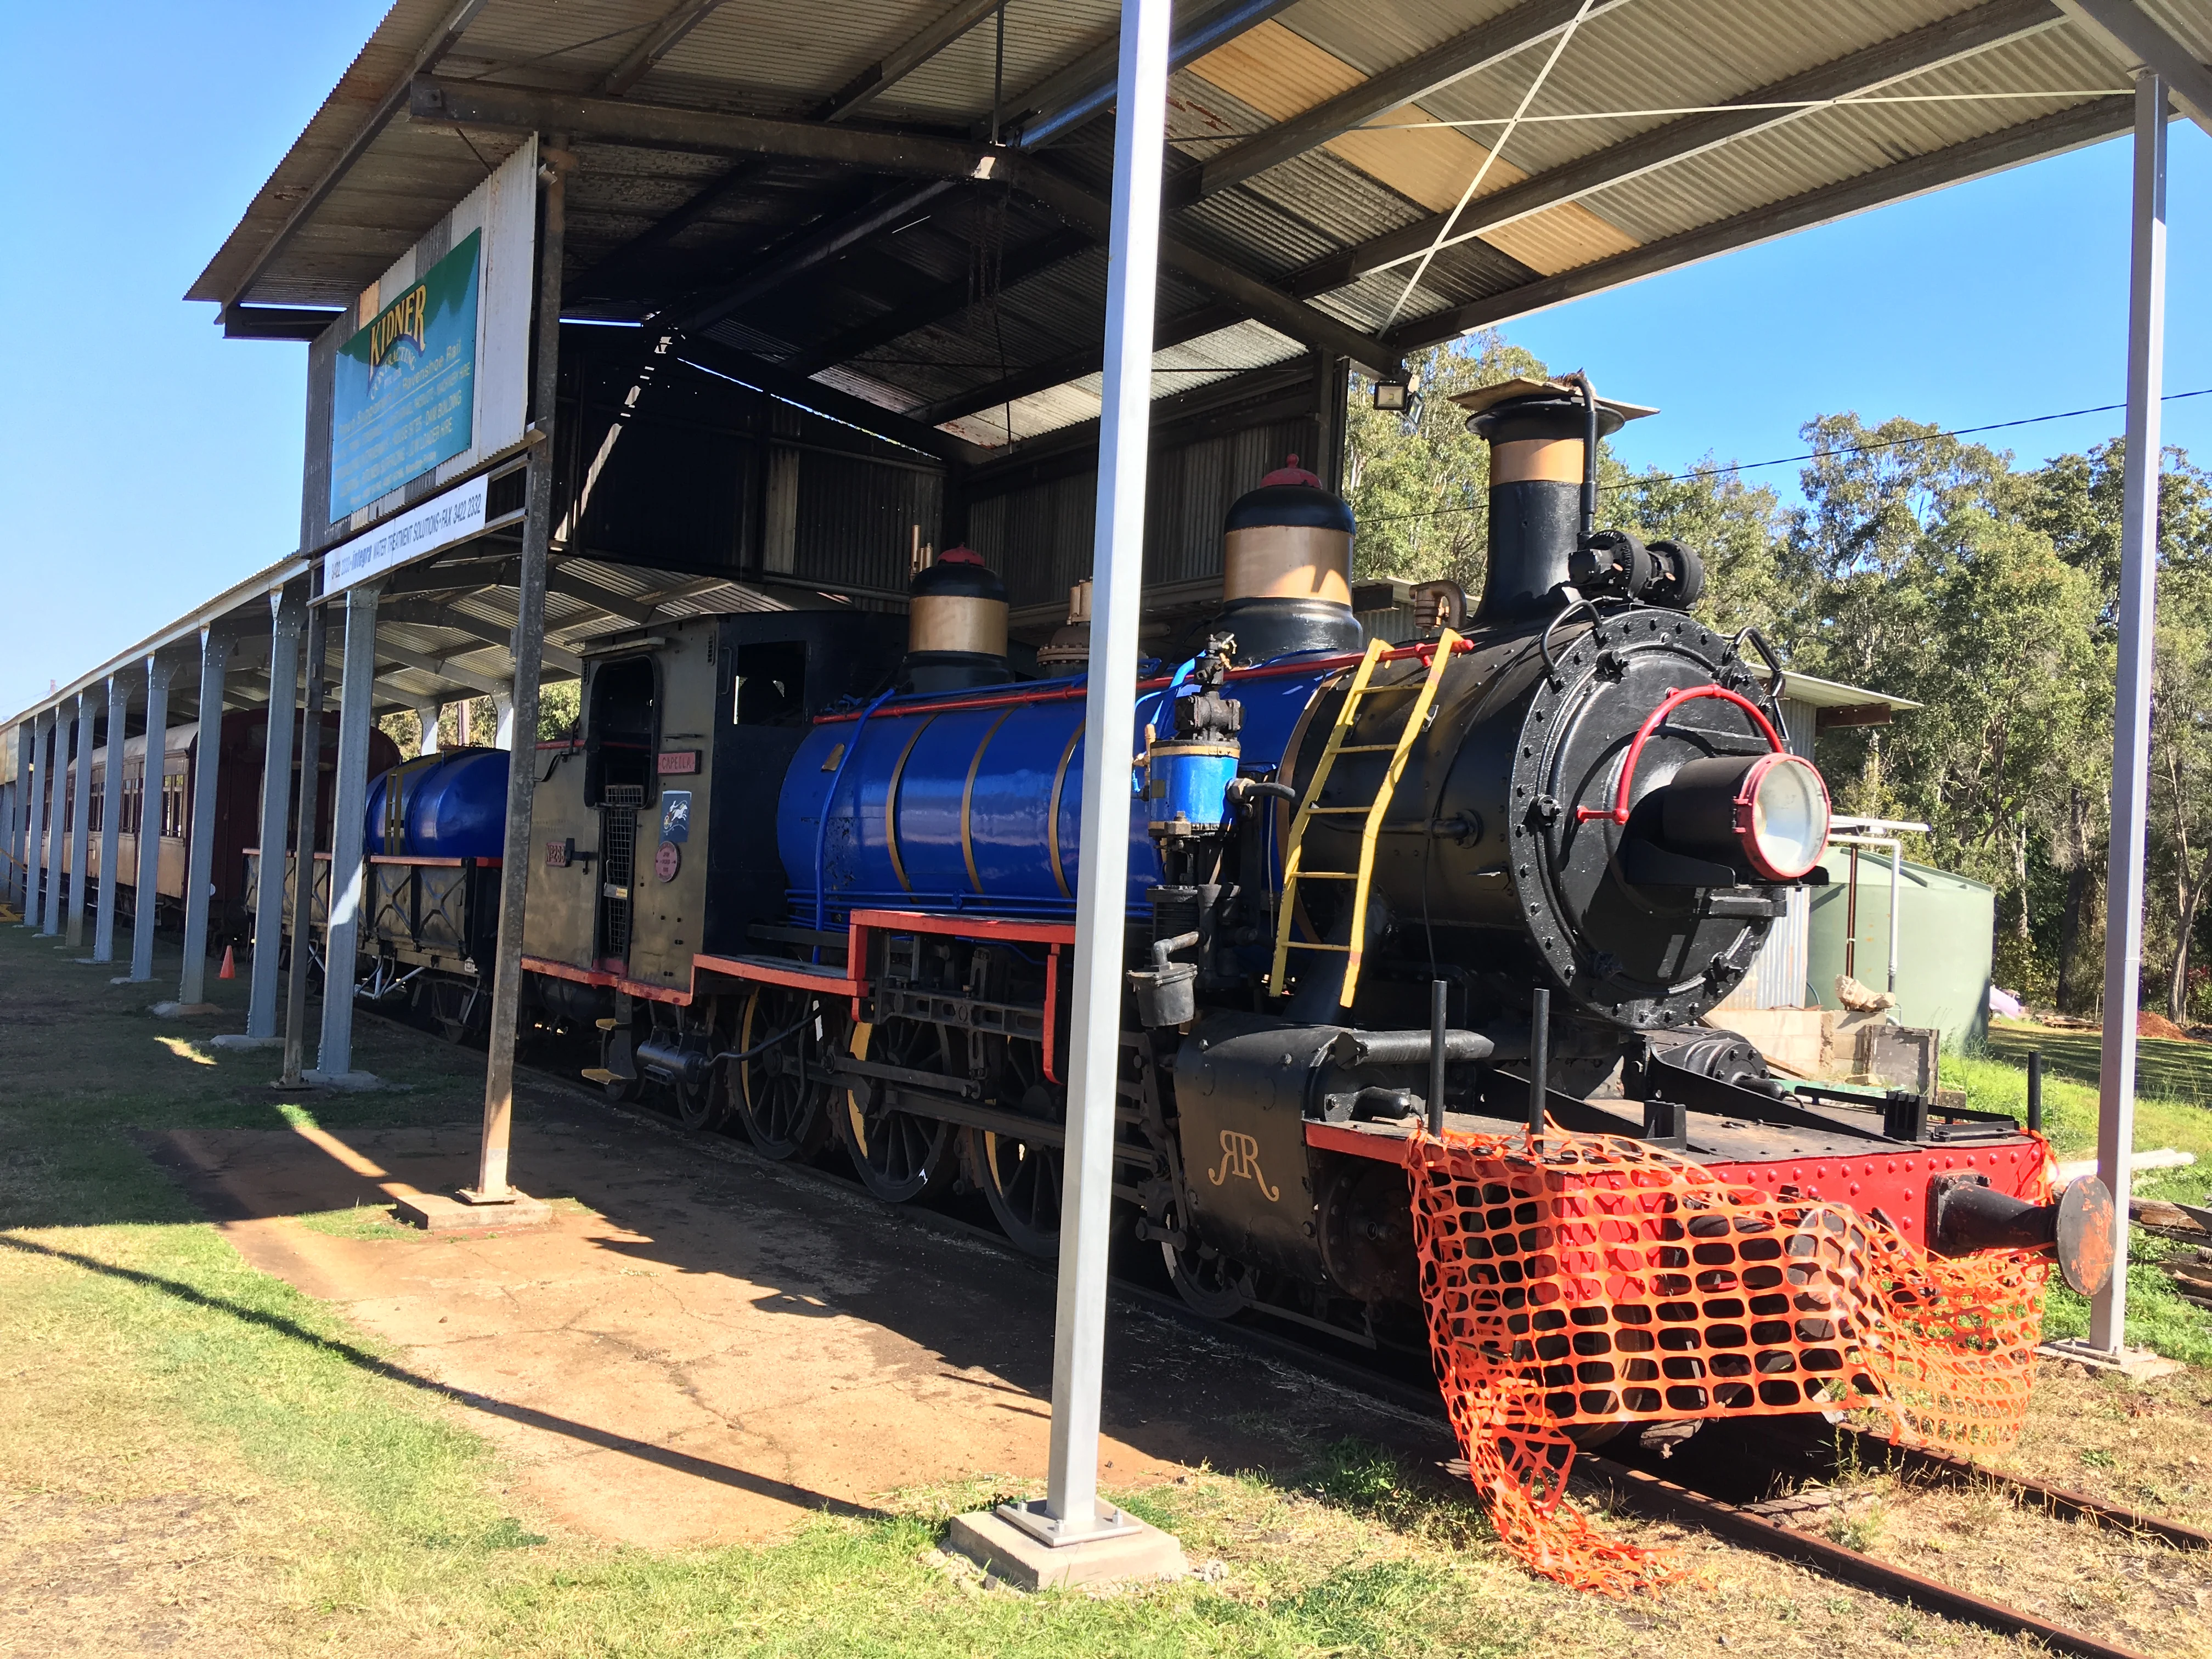 Ravenshoe Railway Caravan Park - we stayed at the Ravenshoe Railway Caravan Park for nine days and the did the waterfall circuit (driving) while we were there.